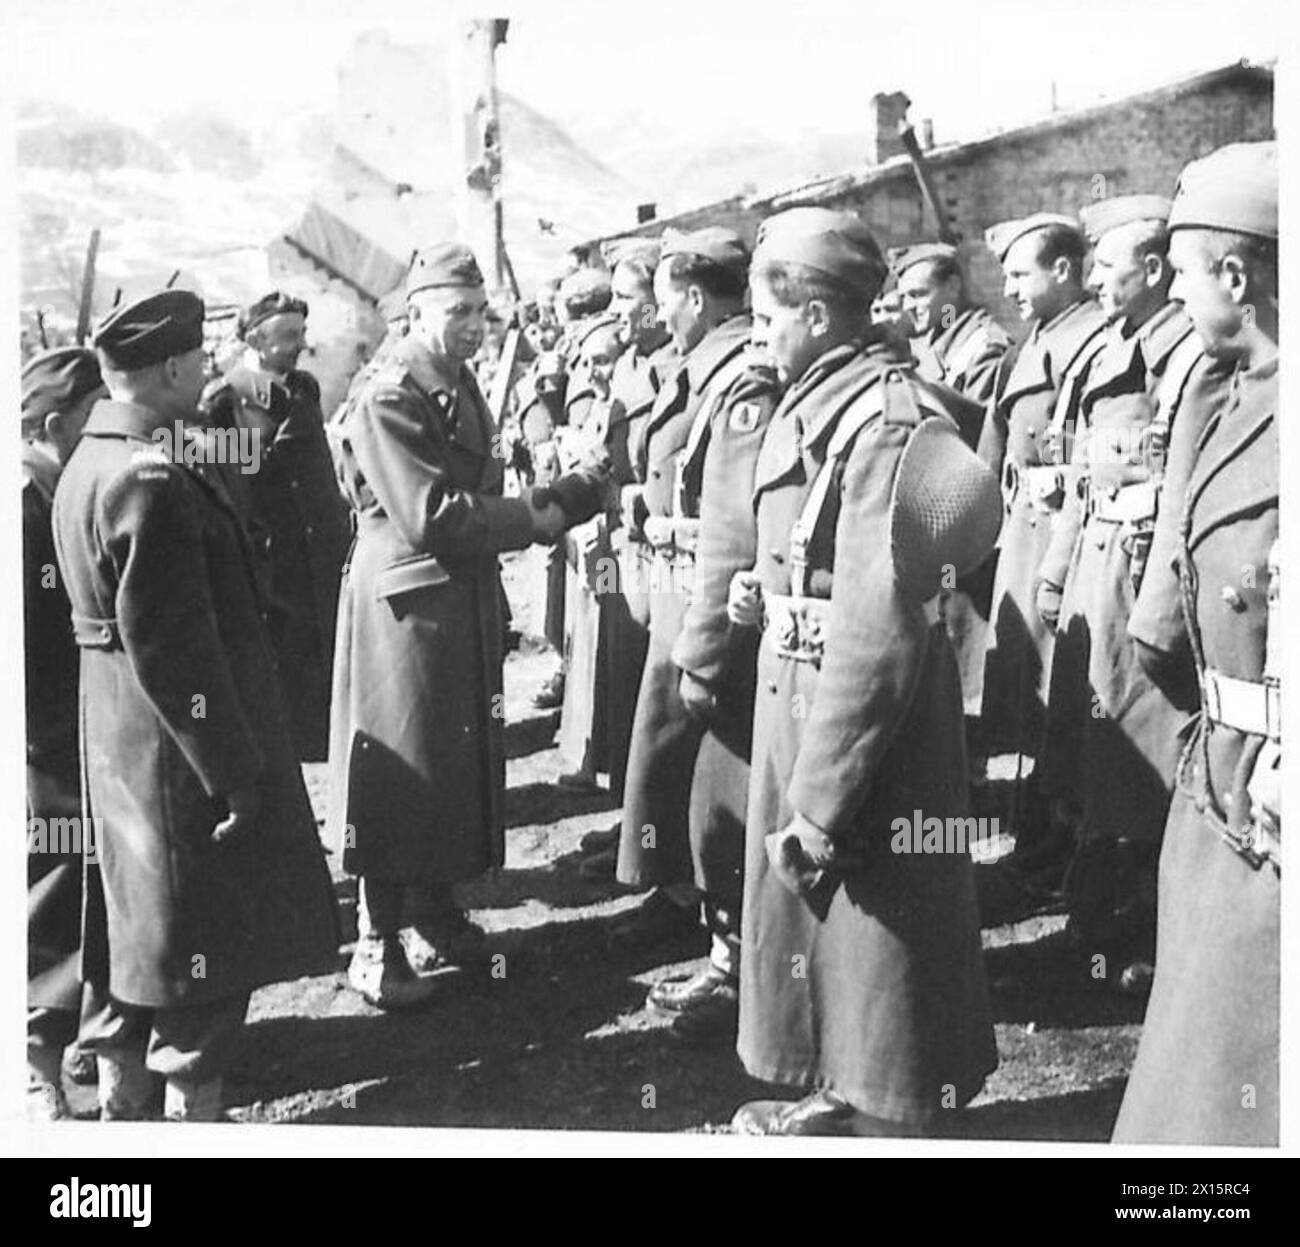 THE POLISH ARMY IN THE ITALIAN CAMPAIGN, 1943-1945 - General Kazimierz Sosnkowski, the C-in-C of the Polish Armed Forces, inspecting troops of the 3rd Carpathian Rifles Division (2nd Polish Corps) at San Pietro Avellana during his visit to various units of the Division, 28/29 March 1944 Polish Army, Polish Armed Forces in the West, Polish Corps, II, Polish Armed Forces in the West, Carpathian Rifles Divisior, 3, 8th Army, Sosnkowski, Kazimierz Stock Photo